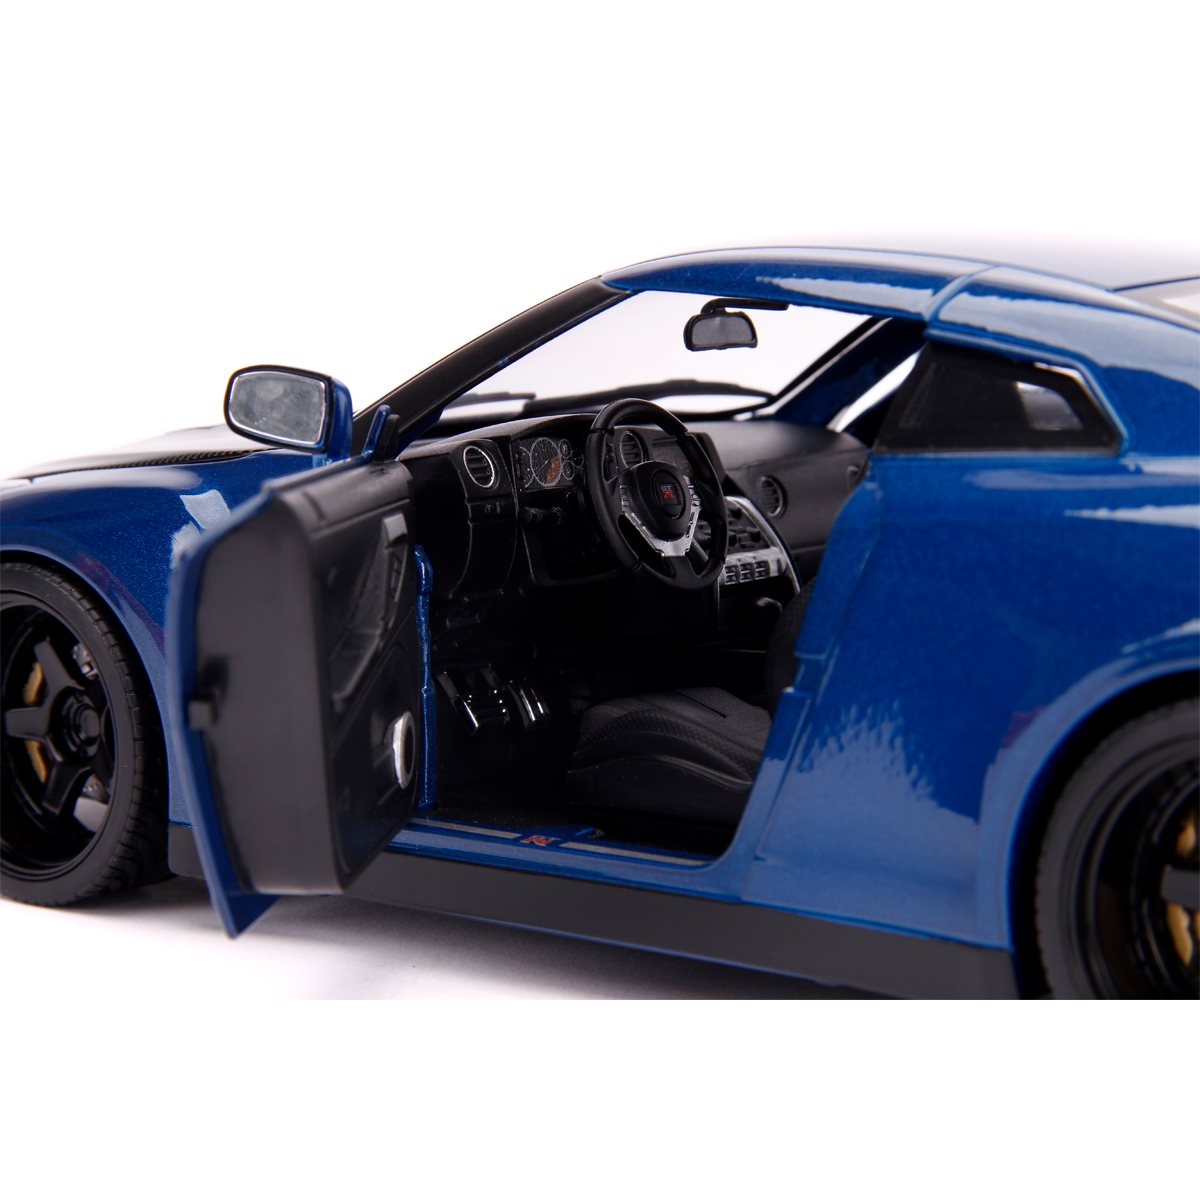 Brian Figur LED Diecast Auto Modell 1/18 Fast and Furious Nissan GT-R R35 